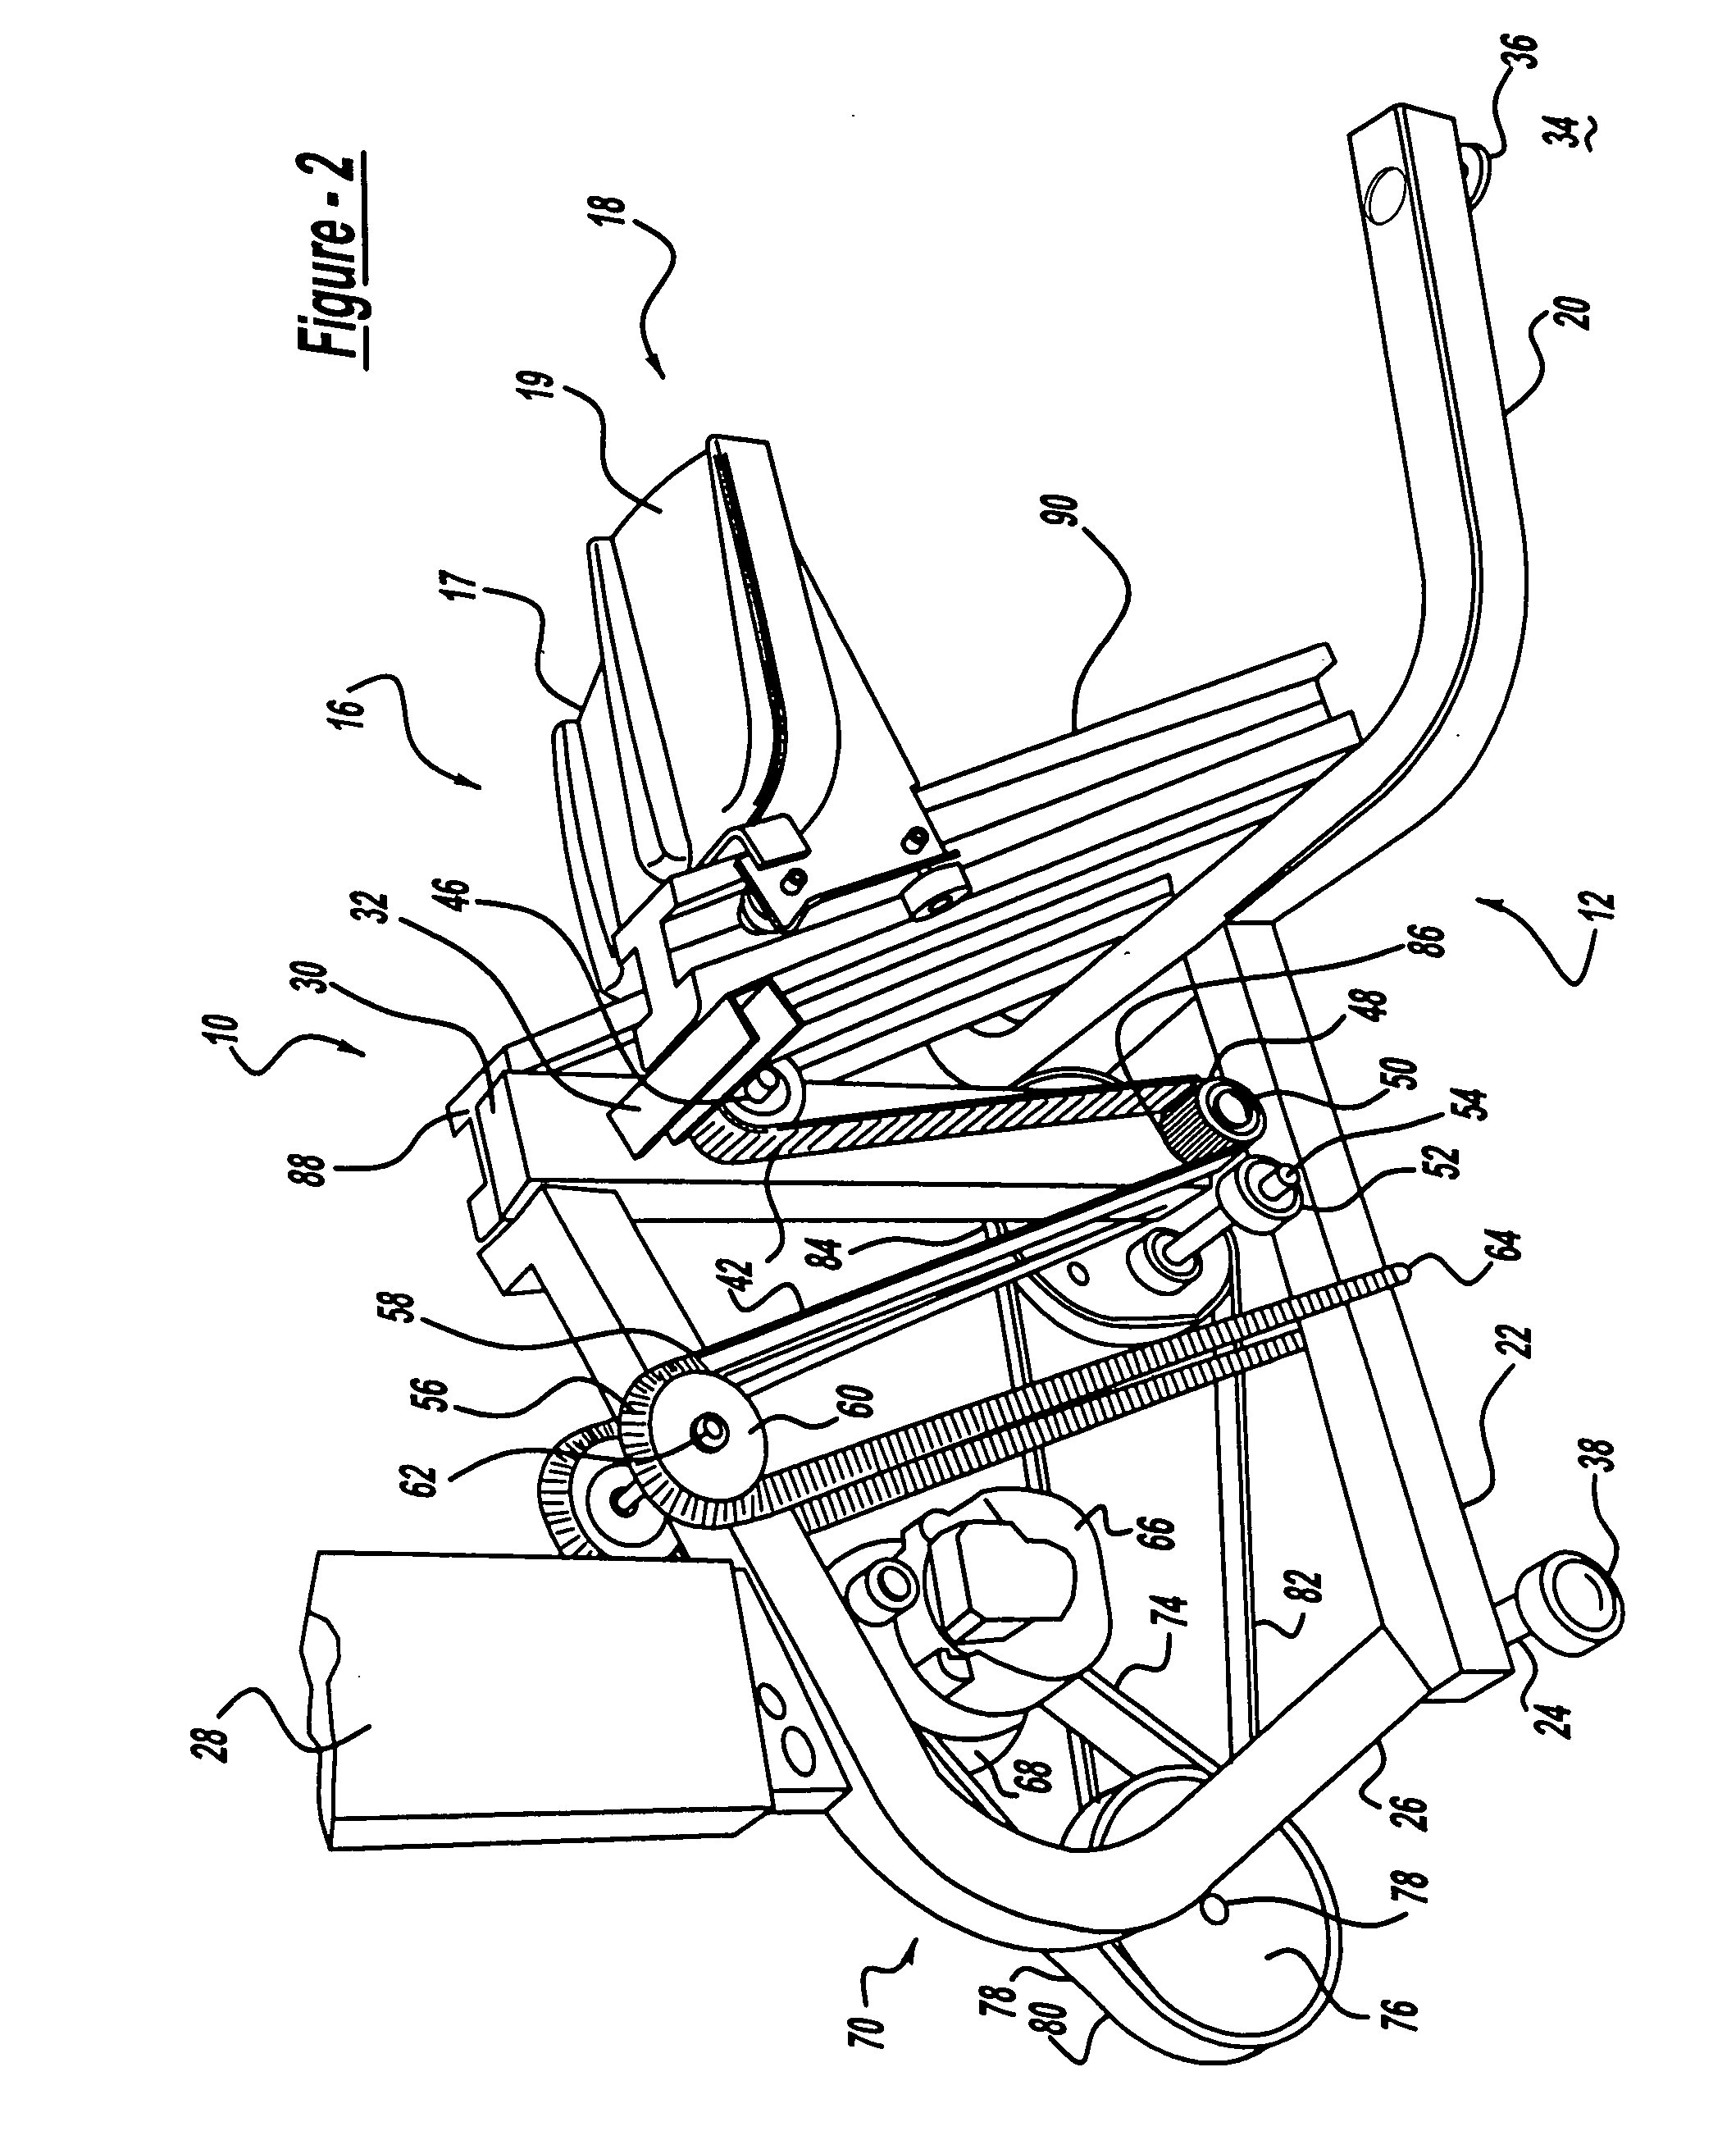 Stairclimber apparatus pedal mechanism